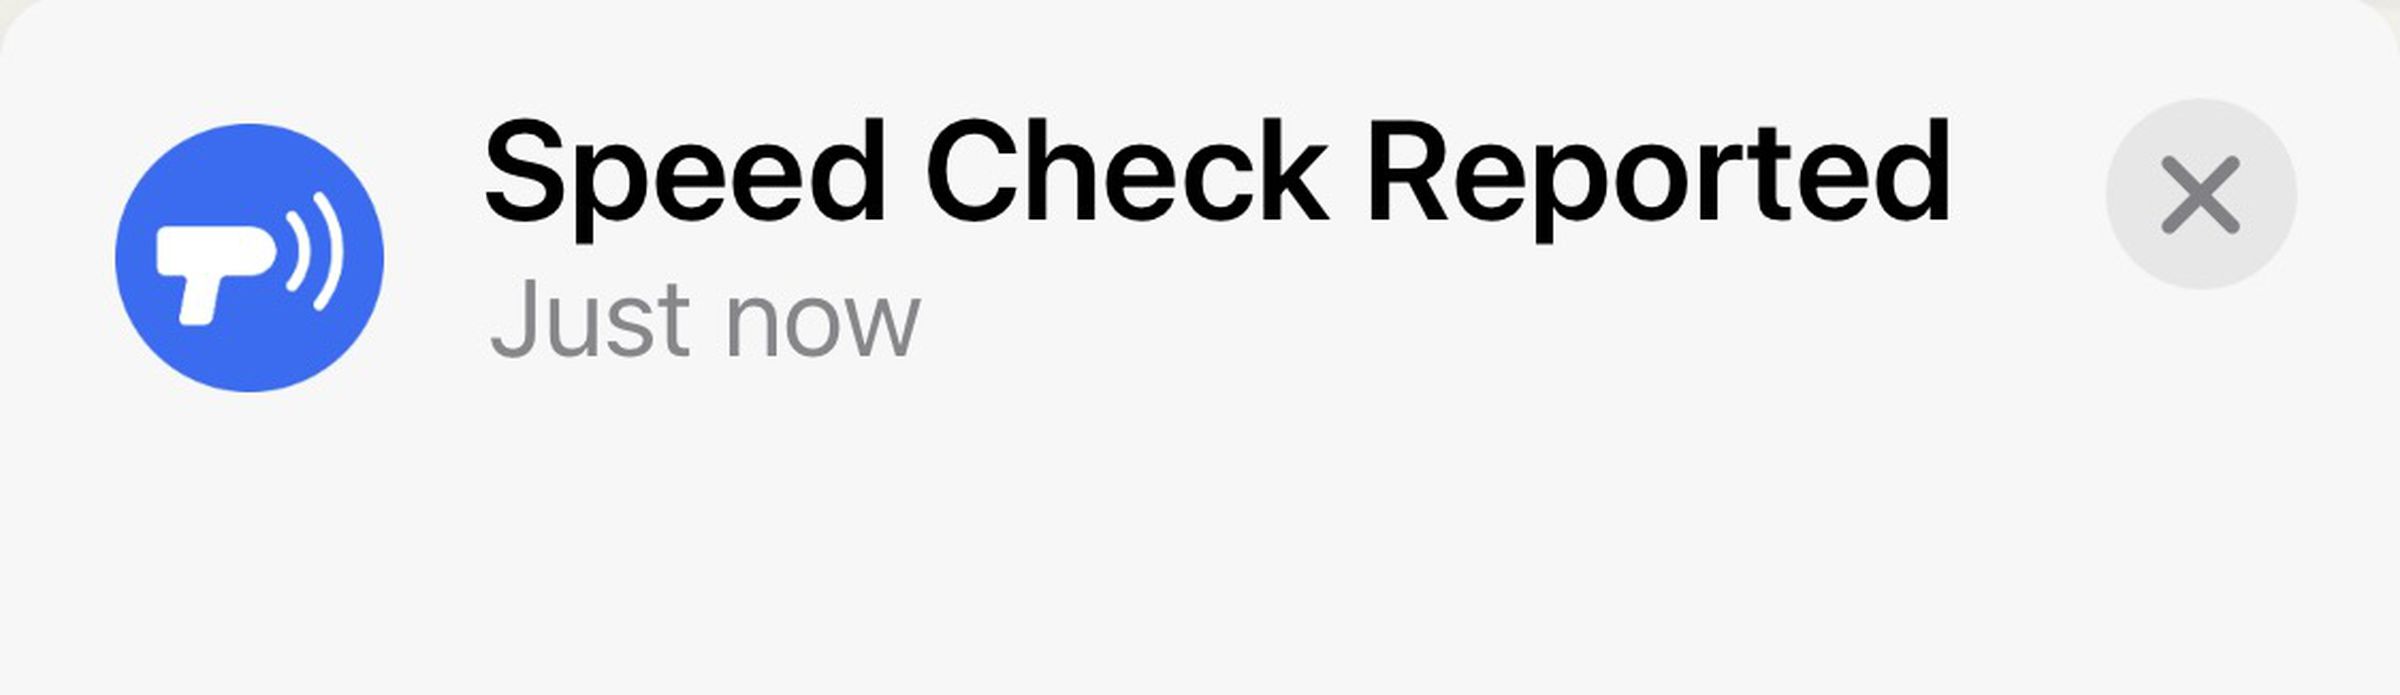 Apple Maps will give you a confirmation that your report has been submitted.